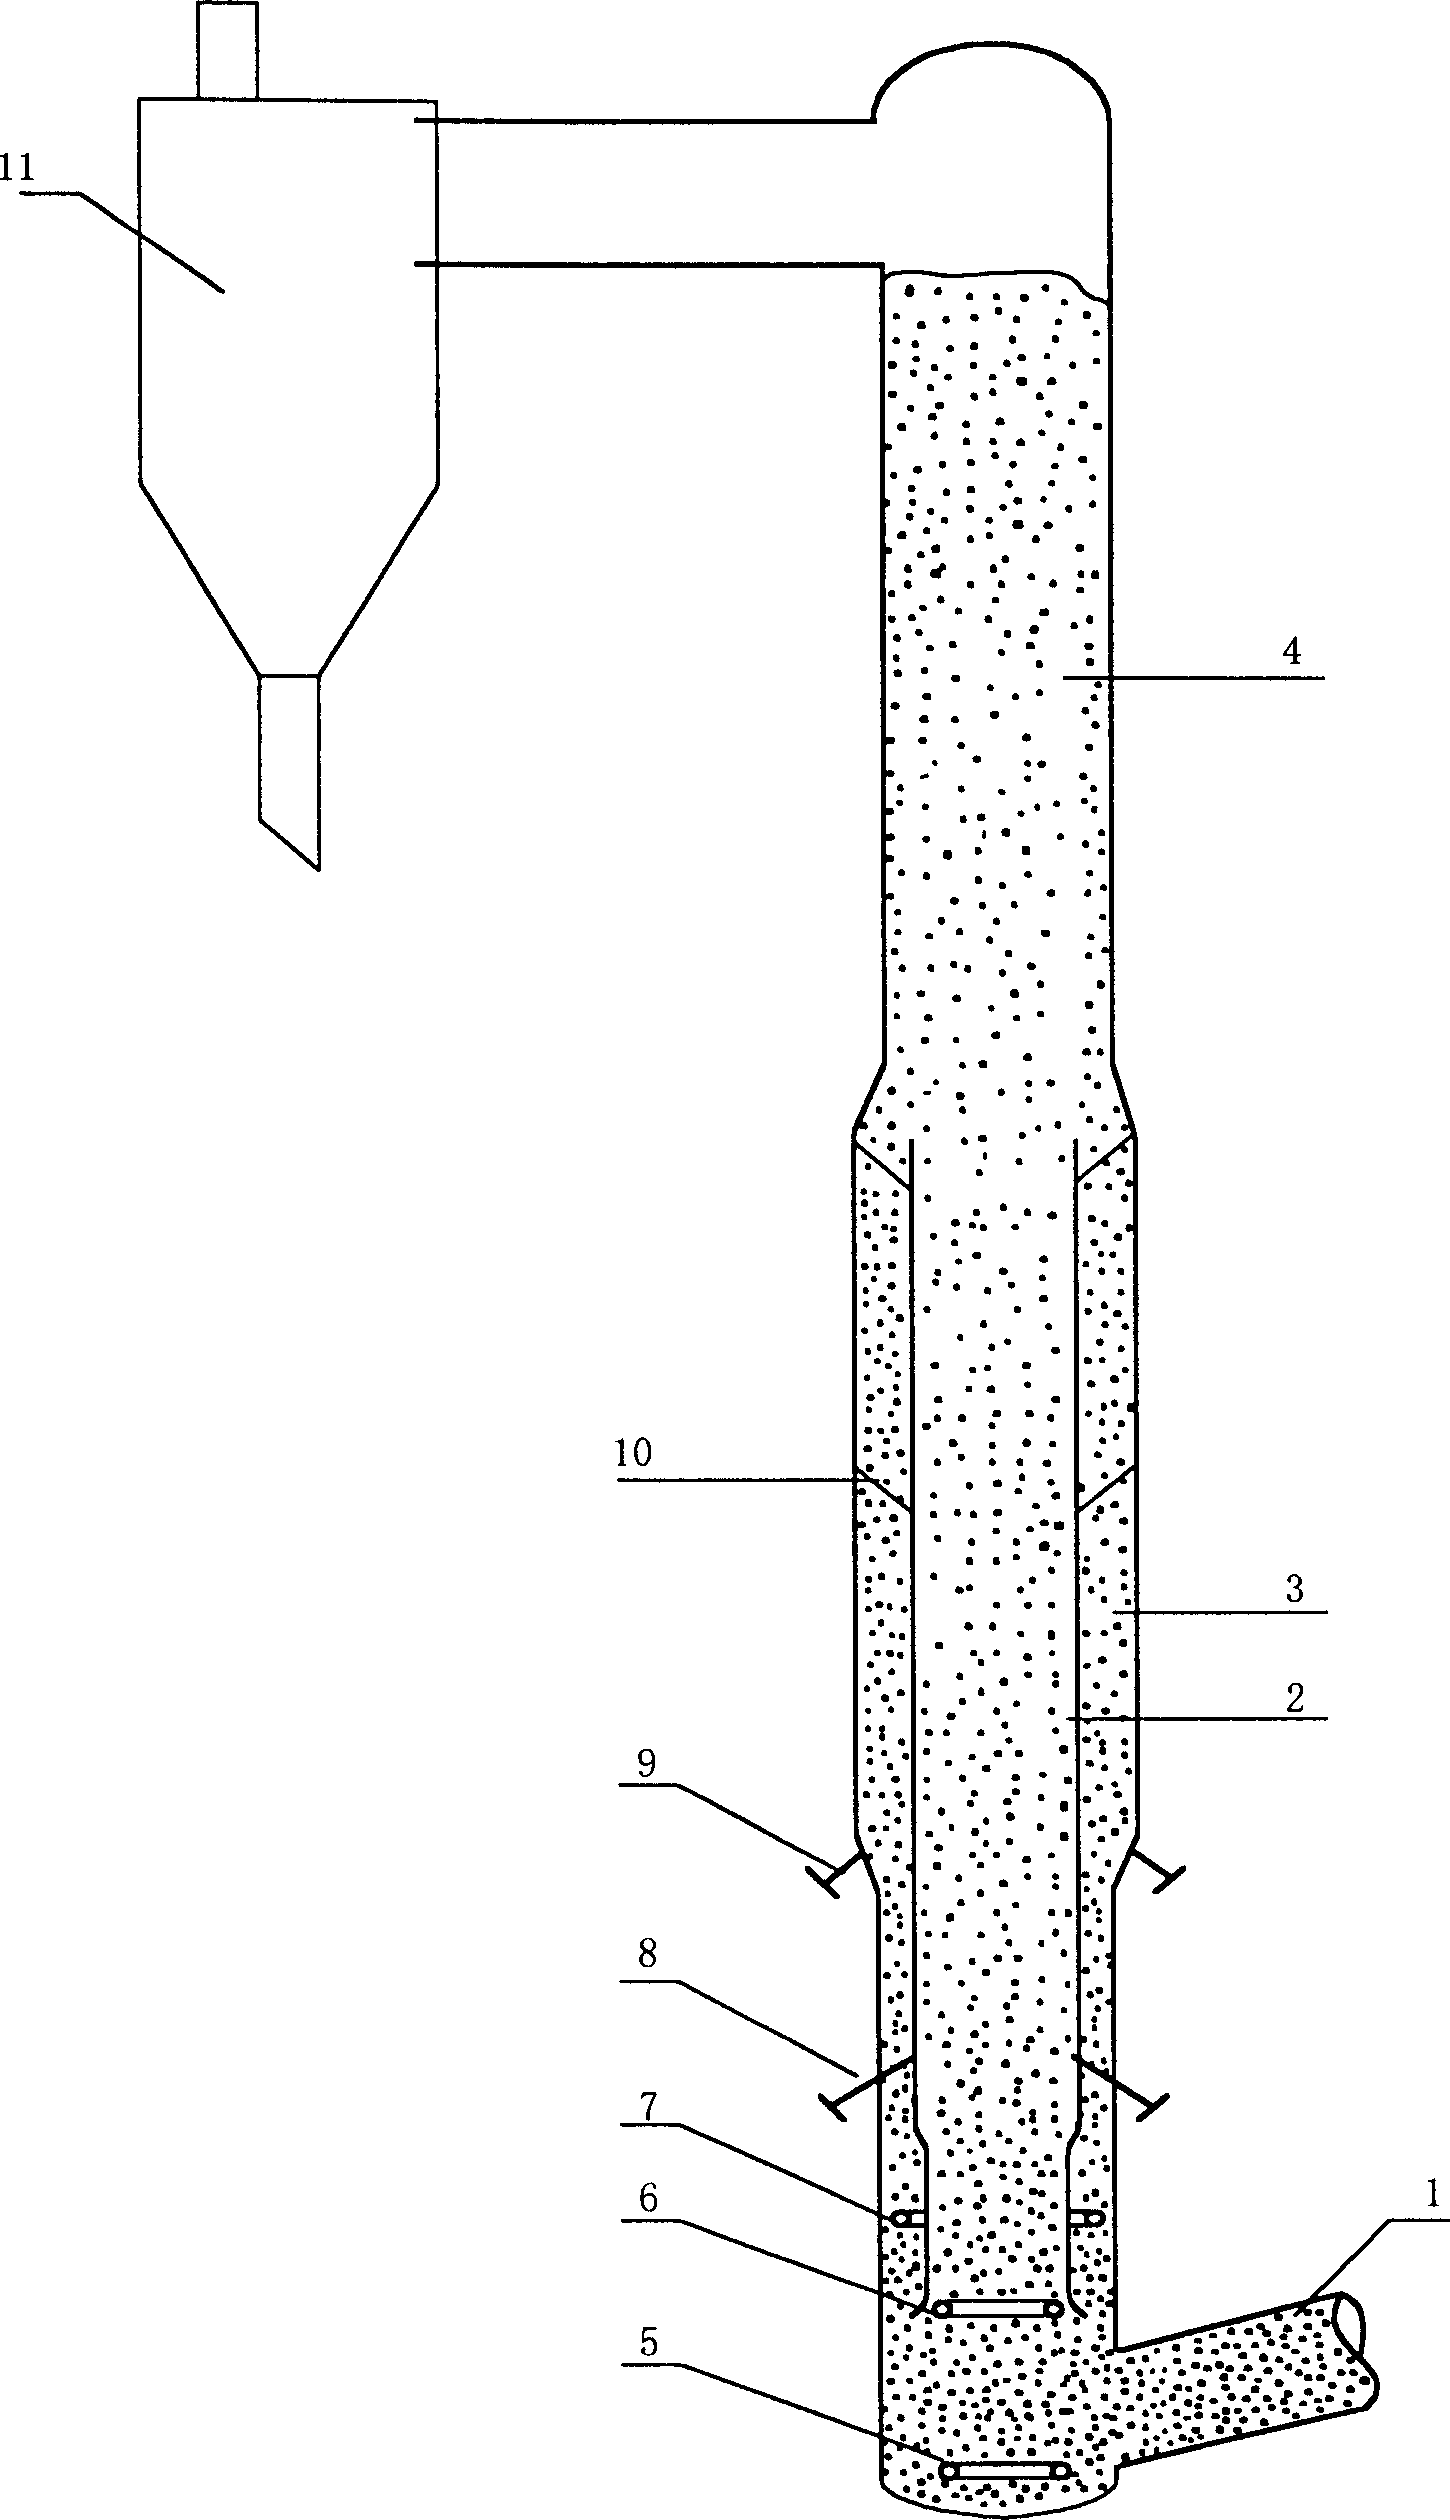 Method for catalyzing and cracking petroleum hydrocarbon in relaying mode